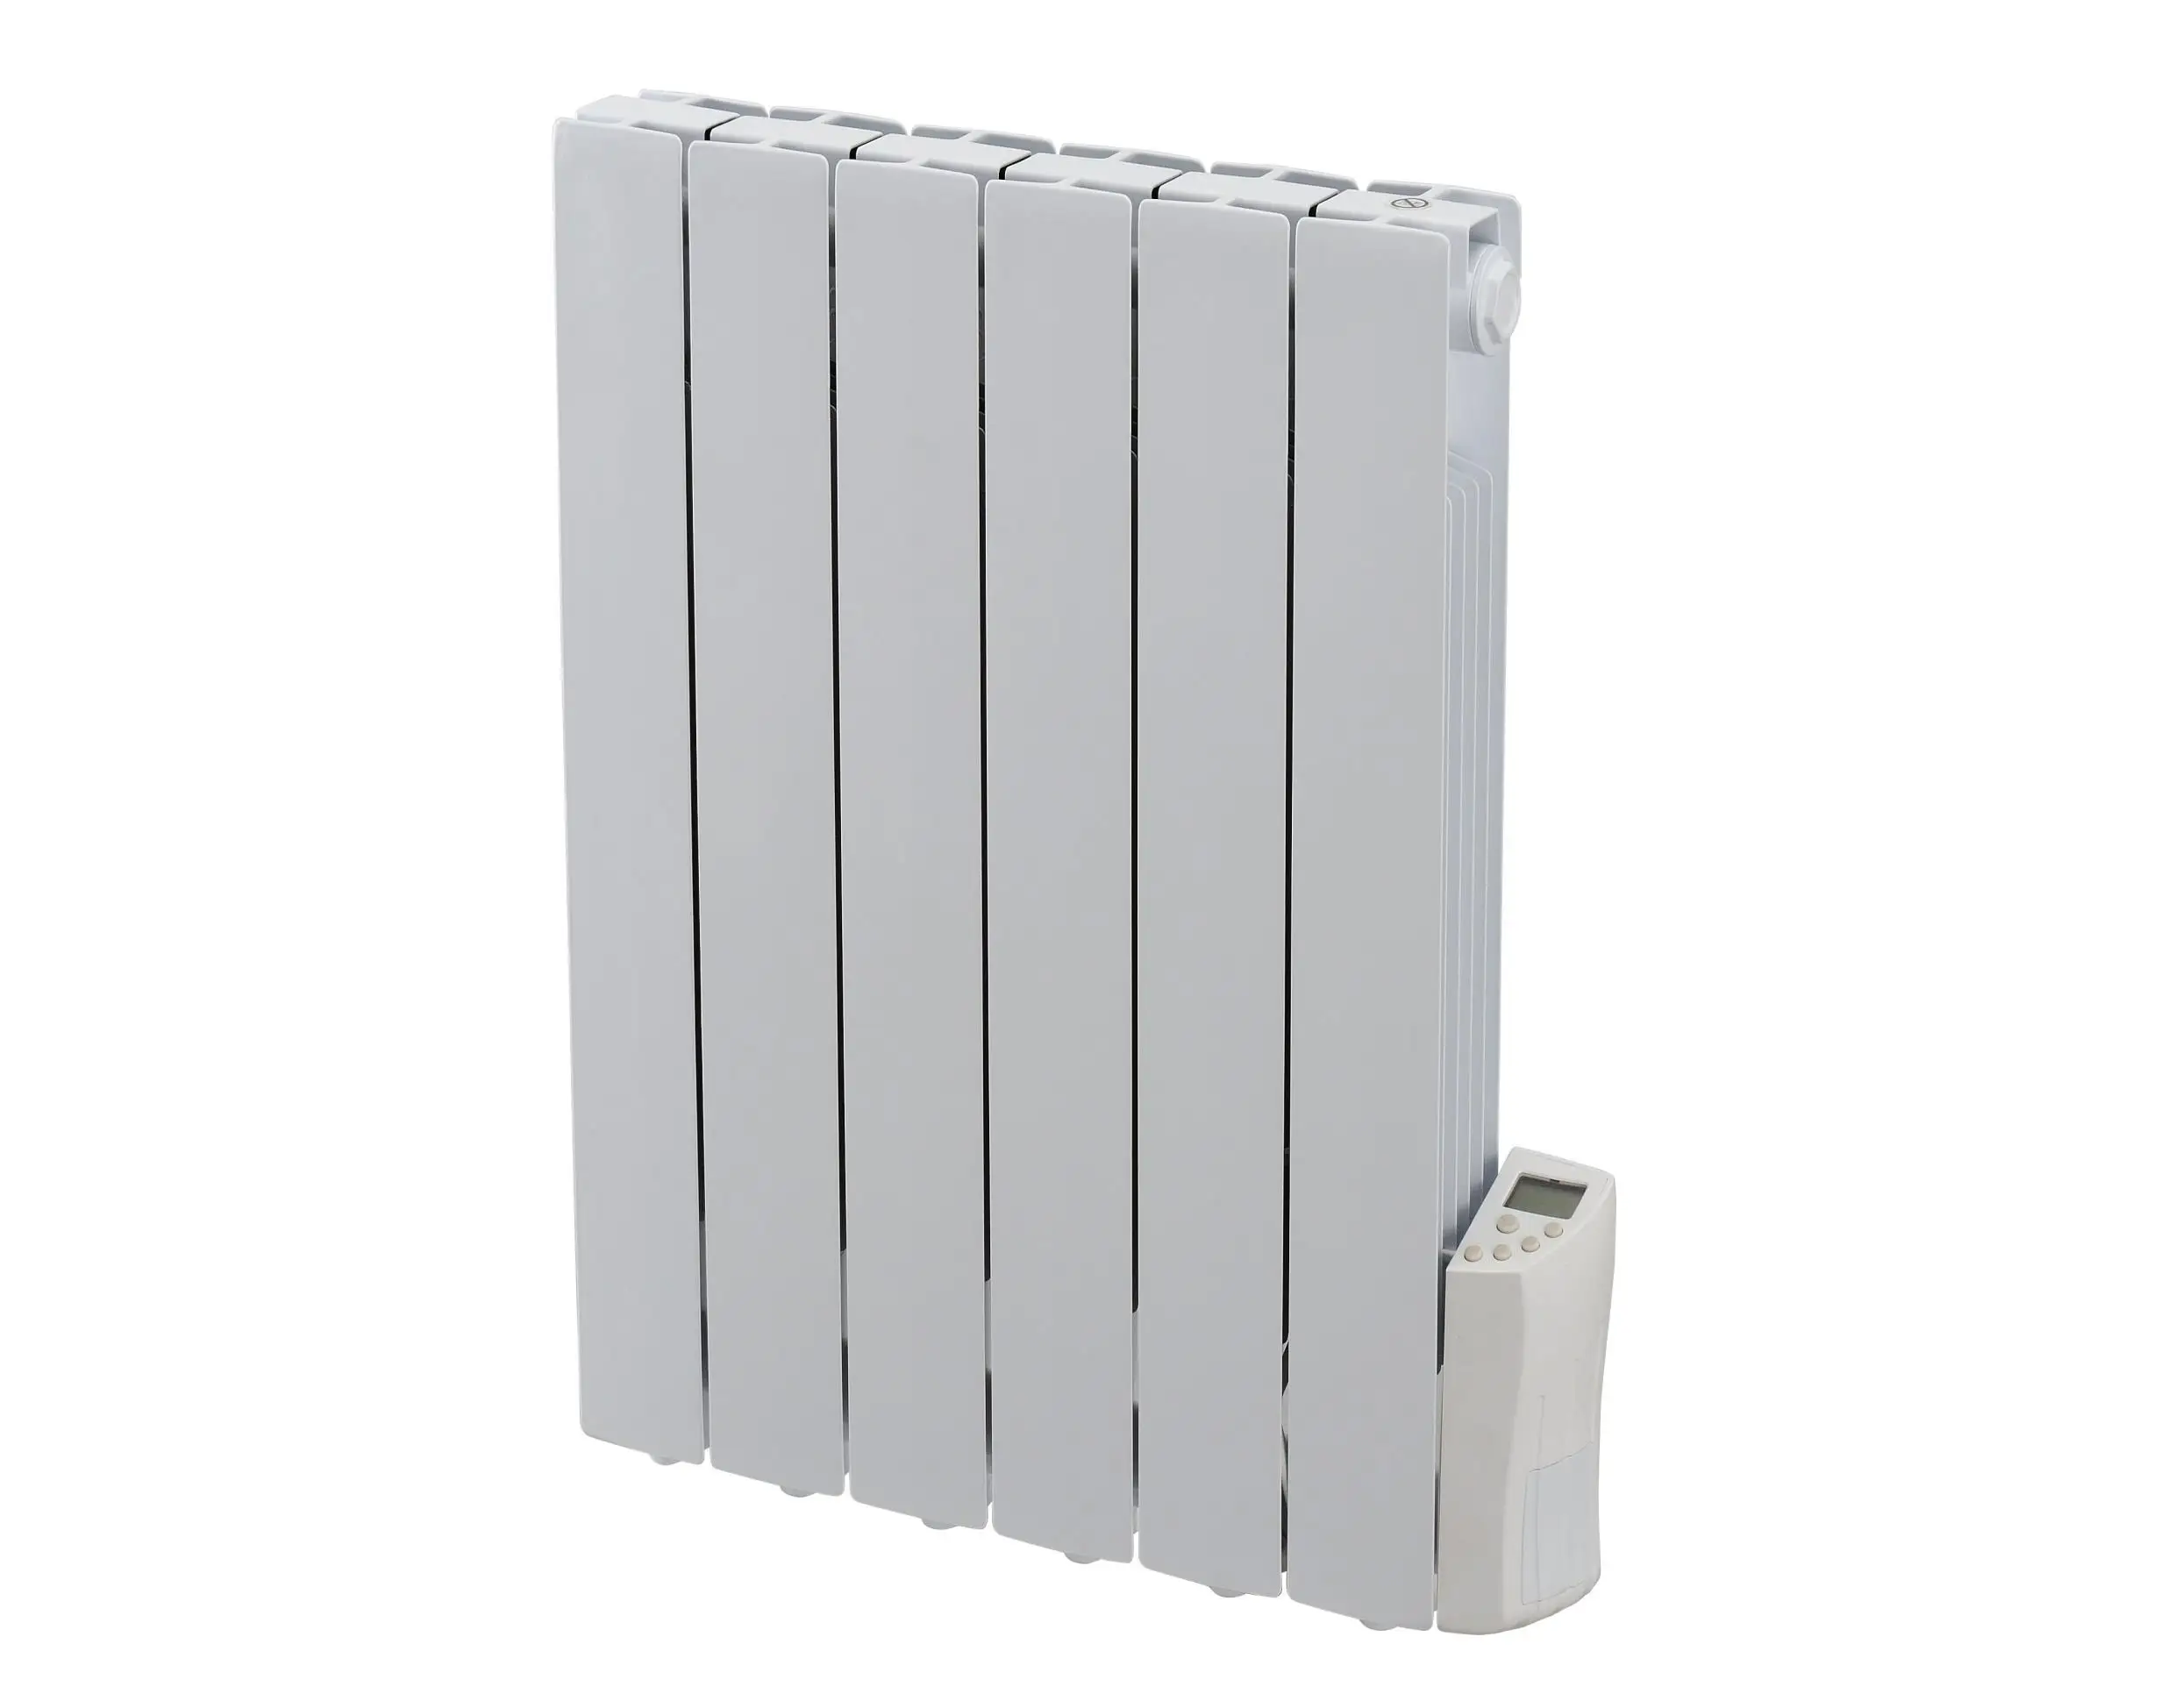 Nf Electric Aluminum Oil Filled Radiator With Programmable Digital Timer Aluminium Wall Mounted - Buy Nf Radiators,Aluminum Oil Radiator,Electric Radiator Product on Alibaba.com